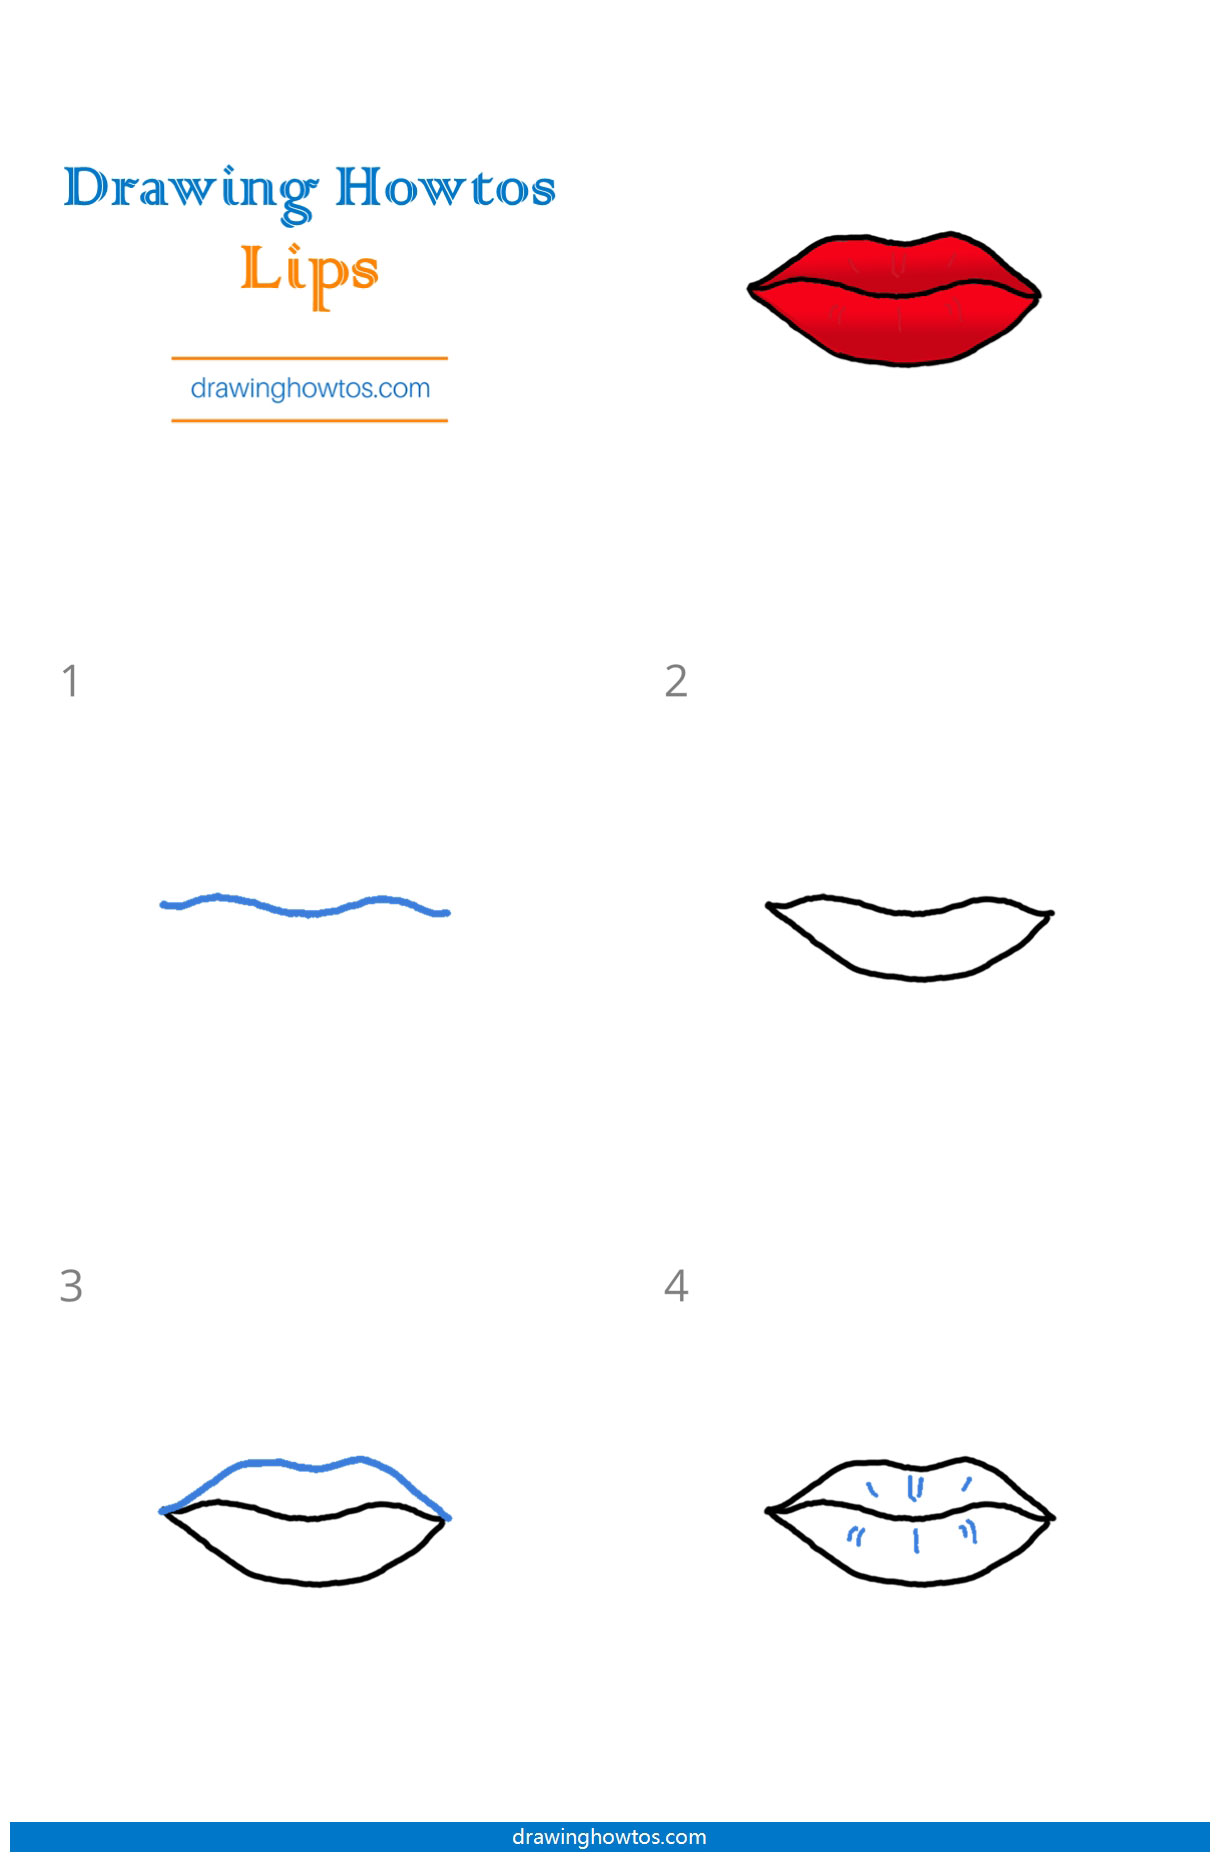 How To Draw Realistic Lips In 7 Simple Steps - Udemy Blog